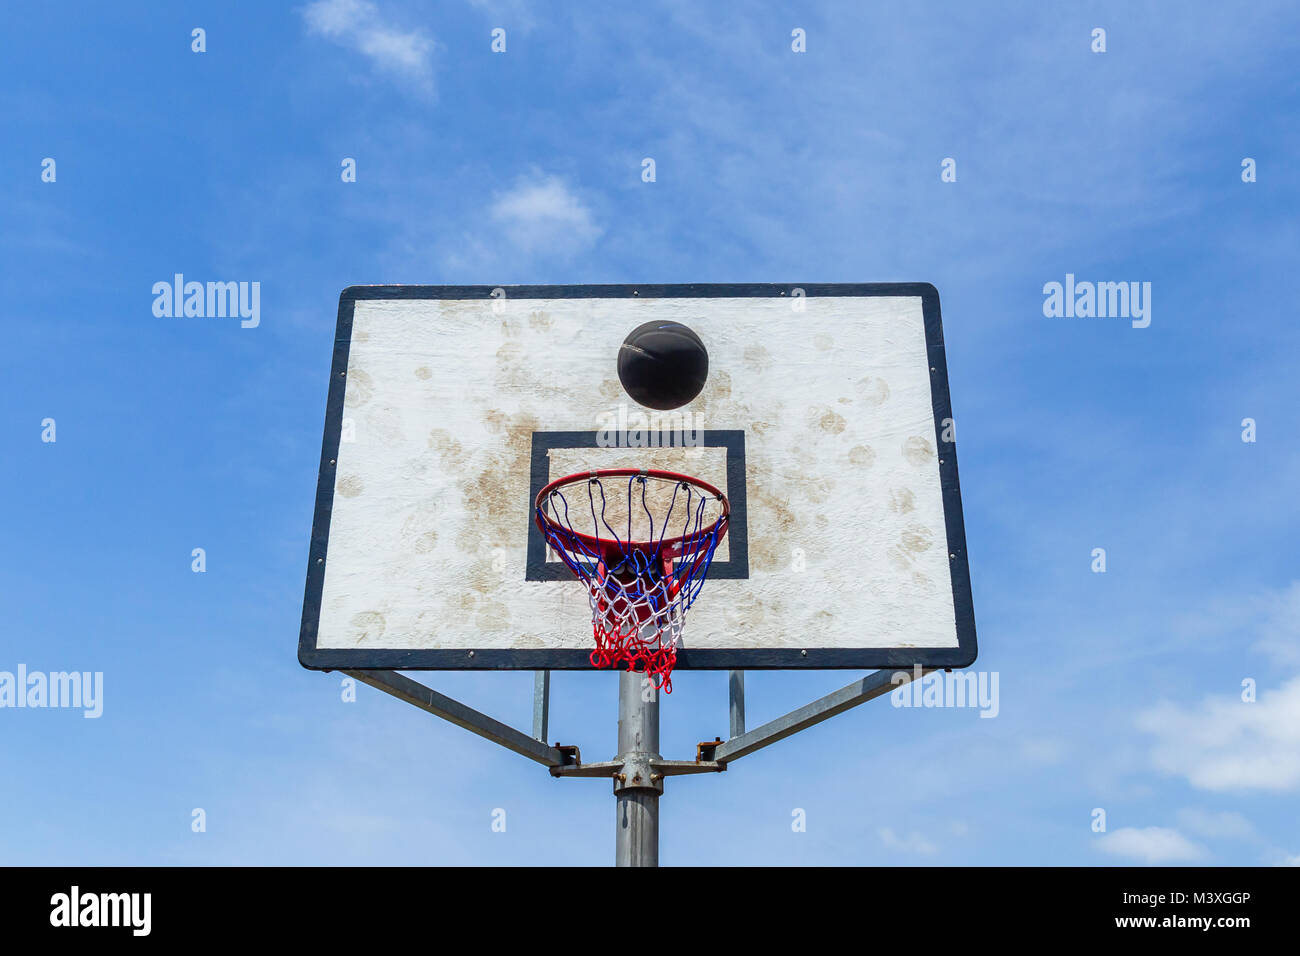 Basketball ball flight against board and net against sky outdoor court Stock Photo